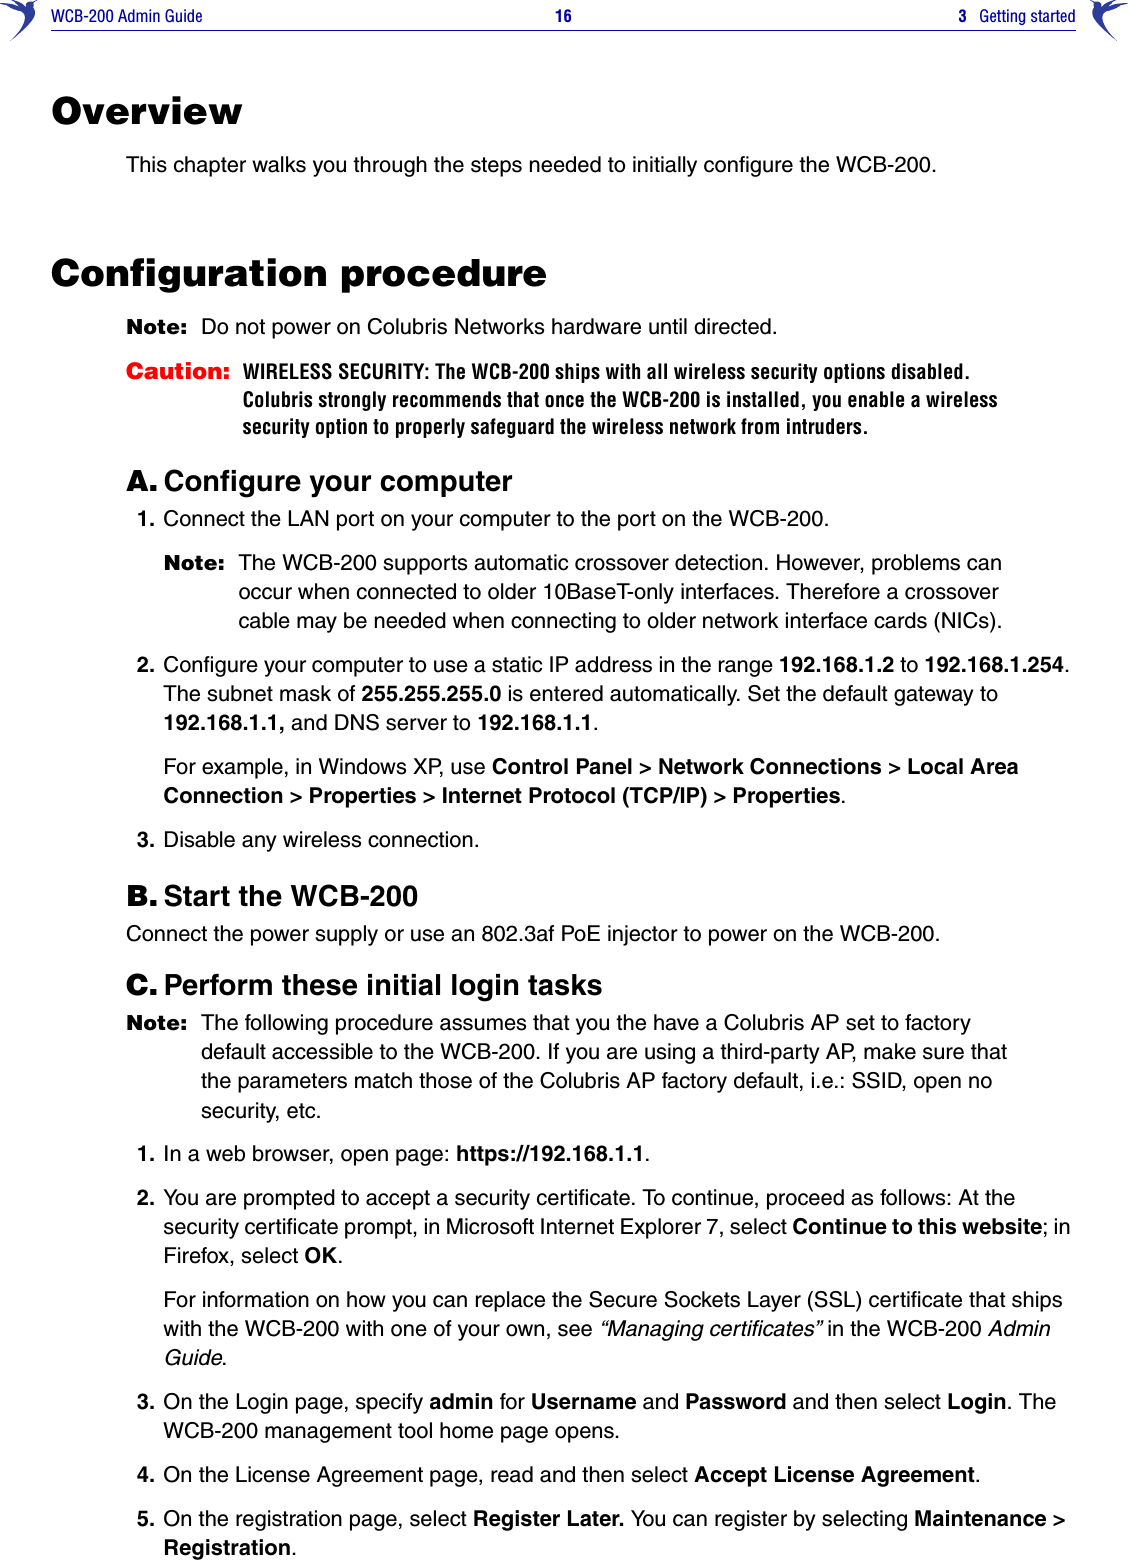 WCB-200 Admin Guide 16 3   Getting startedOverviewThis chapter walks you through the steps needed to initially configure the WCB-200.Configuration procedureNote: Do not power on Colubris Networks hardware until directed.Caution: WIRELESS SECURITY: The WCB-200 ships with all wireless security options disabled. Colubris strongly recommends that once the WCB-200 is installed, you enable a wireless security option to properly safeguard the wireless network from intruders.A. Configure your computer1. Connect the LAN port on your computer to the port on the WCB-200.Note: The WCB-200 supports automatic crossover detection. However, problems can occur when connected to older 10BaseT-only interfaces. Therefore a crossover cable may be needed when connecting to older network interface cards (NICs).2. Configure your computer to use a static IP address in the range 192.168.1.2 to 192.168.1.254. The subnet mask of 255.255.255.0 is entered automatically. Set the default gateway to 192.168.1.1, and DNS server to 192.168.1.1.For example, in Windows XP, use Control Panel &gt; Network Connections &gt; Local Area Connection &gt; Properties &gt; Internet Protocol (TCP/IP) &gt; Properties.3. Disable any wireless connection.B. Start the WCB-200Connect the power supply or use an 802.3af PoE injector to power on the WCB-200. C. Perform these initial login tasksNote: The following procedure assumes that you the have a Colubris AP set to factory default accessible to the WCB-200. If you are using a third-party AP, make sure that the parameters match those of the Colubris AP factory default, i.e.: SSID, open no security, etc.1. In a web browser, open page: https://192.168.1.1.2. You are prompted to accept a security certificate. To continue, proceed as follows: At the security certificate prompt, in Microsoft Internet Explorer 7, select Continue to this website; in Firefox, select OK. For information on how you can replace the Secure Sockets Layer (SSL) certificate that ships with the WCB-200 with one of your own, see “Managing certificates” in the WCB-200 Admin Guide. 3. On the Login page, specify admin for Username and Password and then select Login. The WCB-200 management tool home page opens. 4. On the License Agreement page, read and then select Accept License Agreement.5. On the registration page, select Register Later. You can register by selecting Maintenance &gt; Registration.